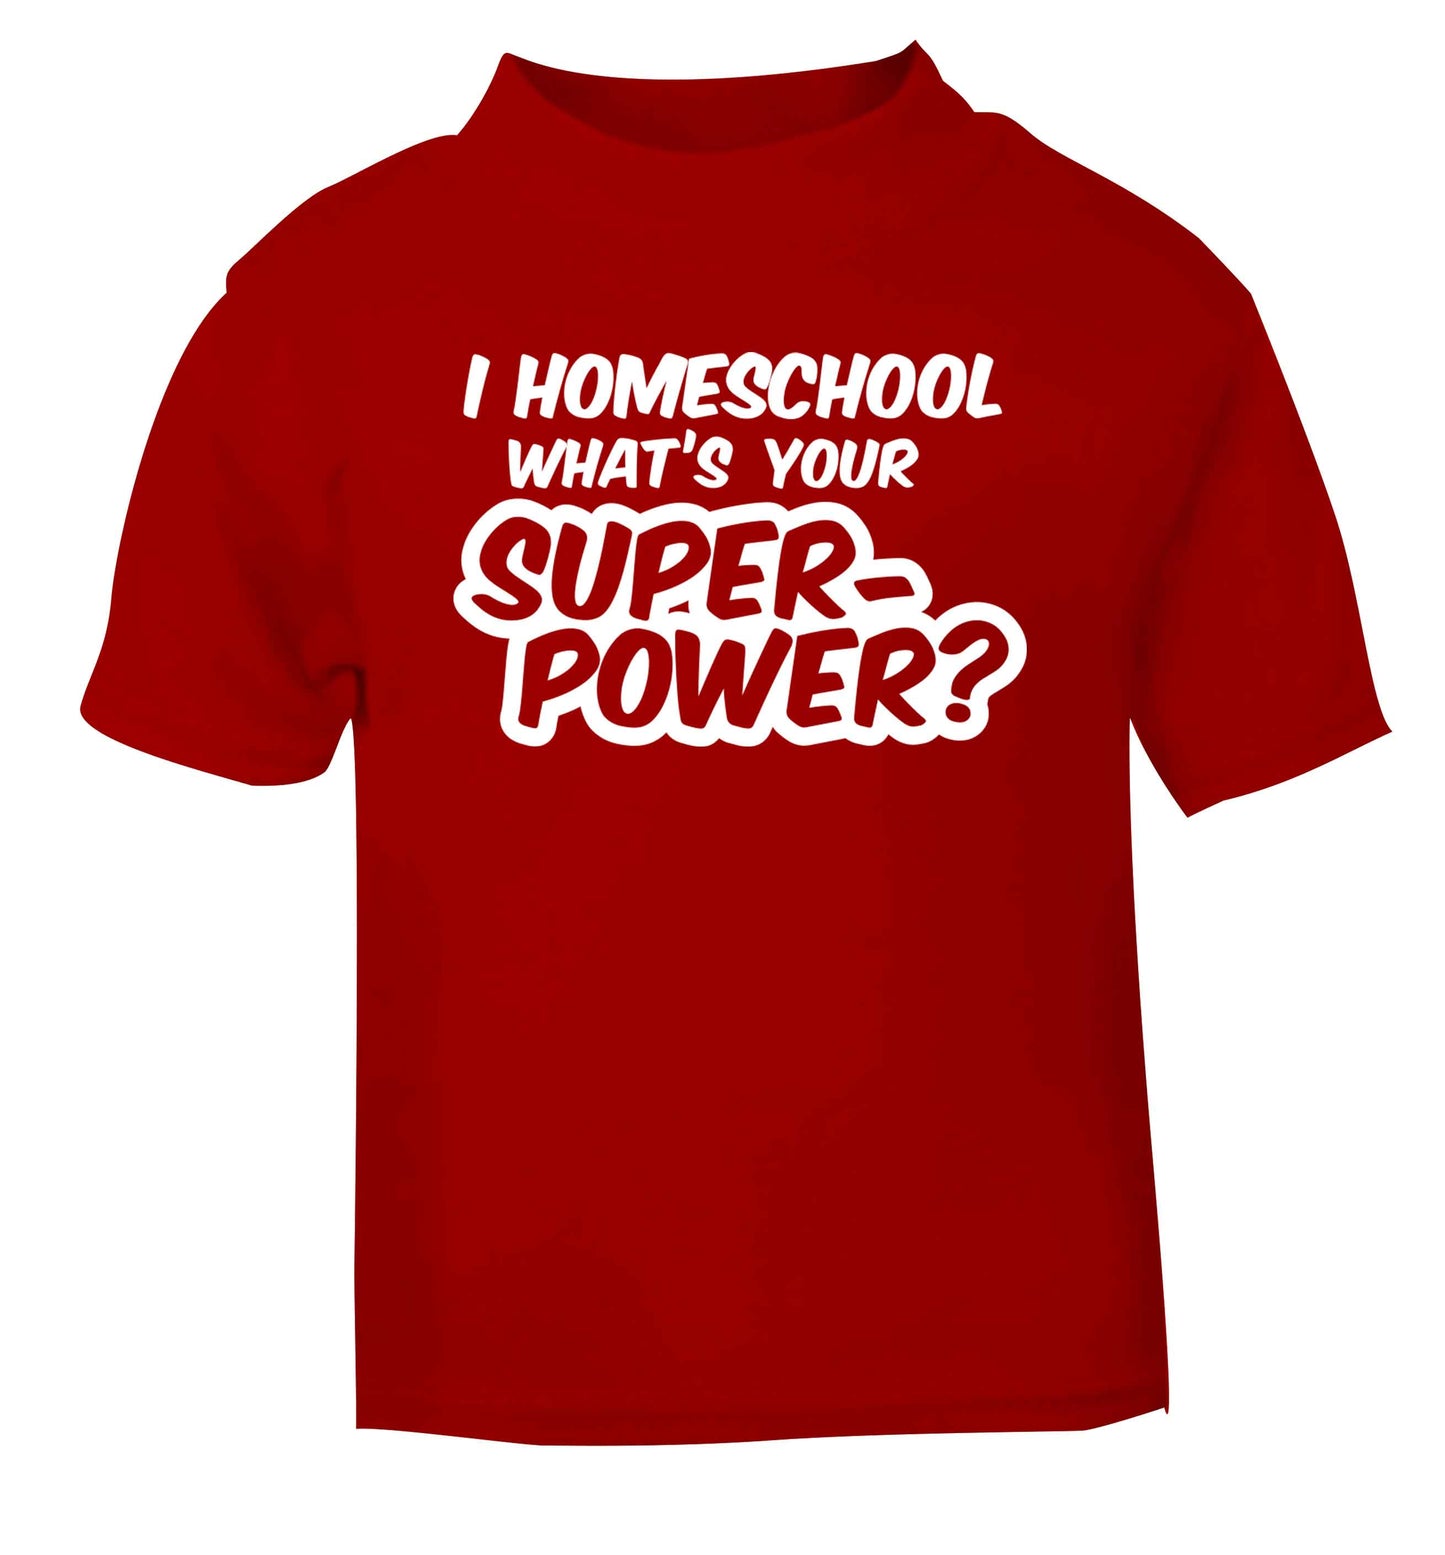 I homeschool what's your superpower? red Baby Toddler Tshirt 2 Years